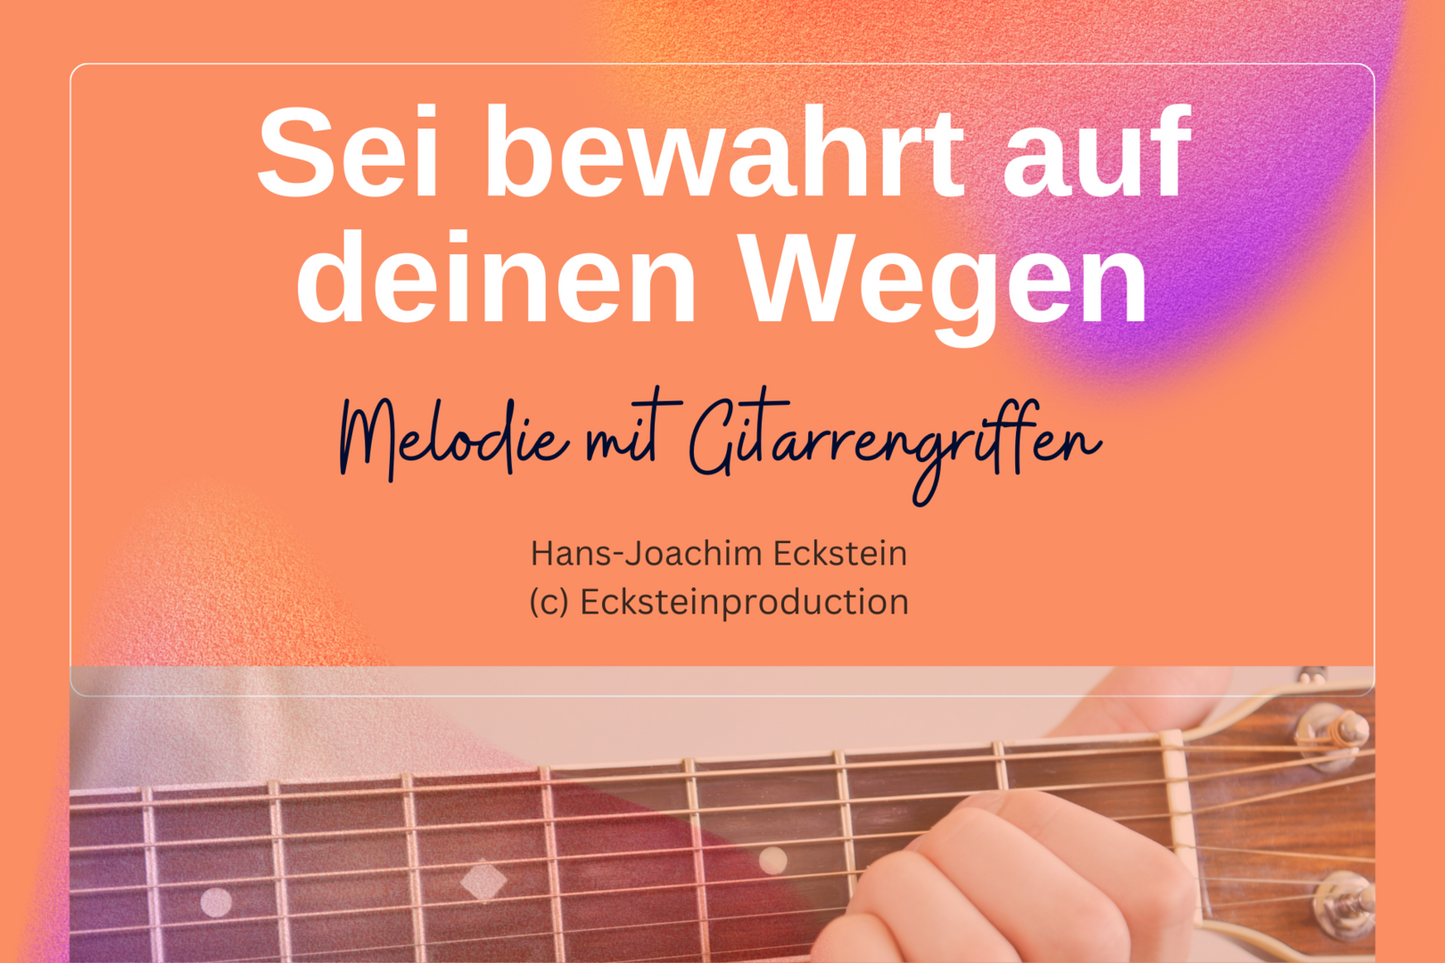 Be safe in your ways (melody with guitar chords) Hans-Joachim Eckstein